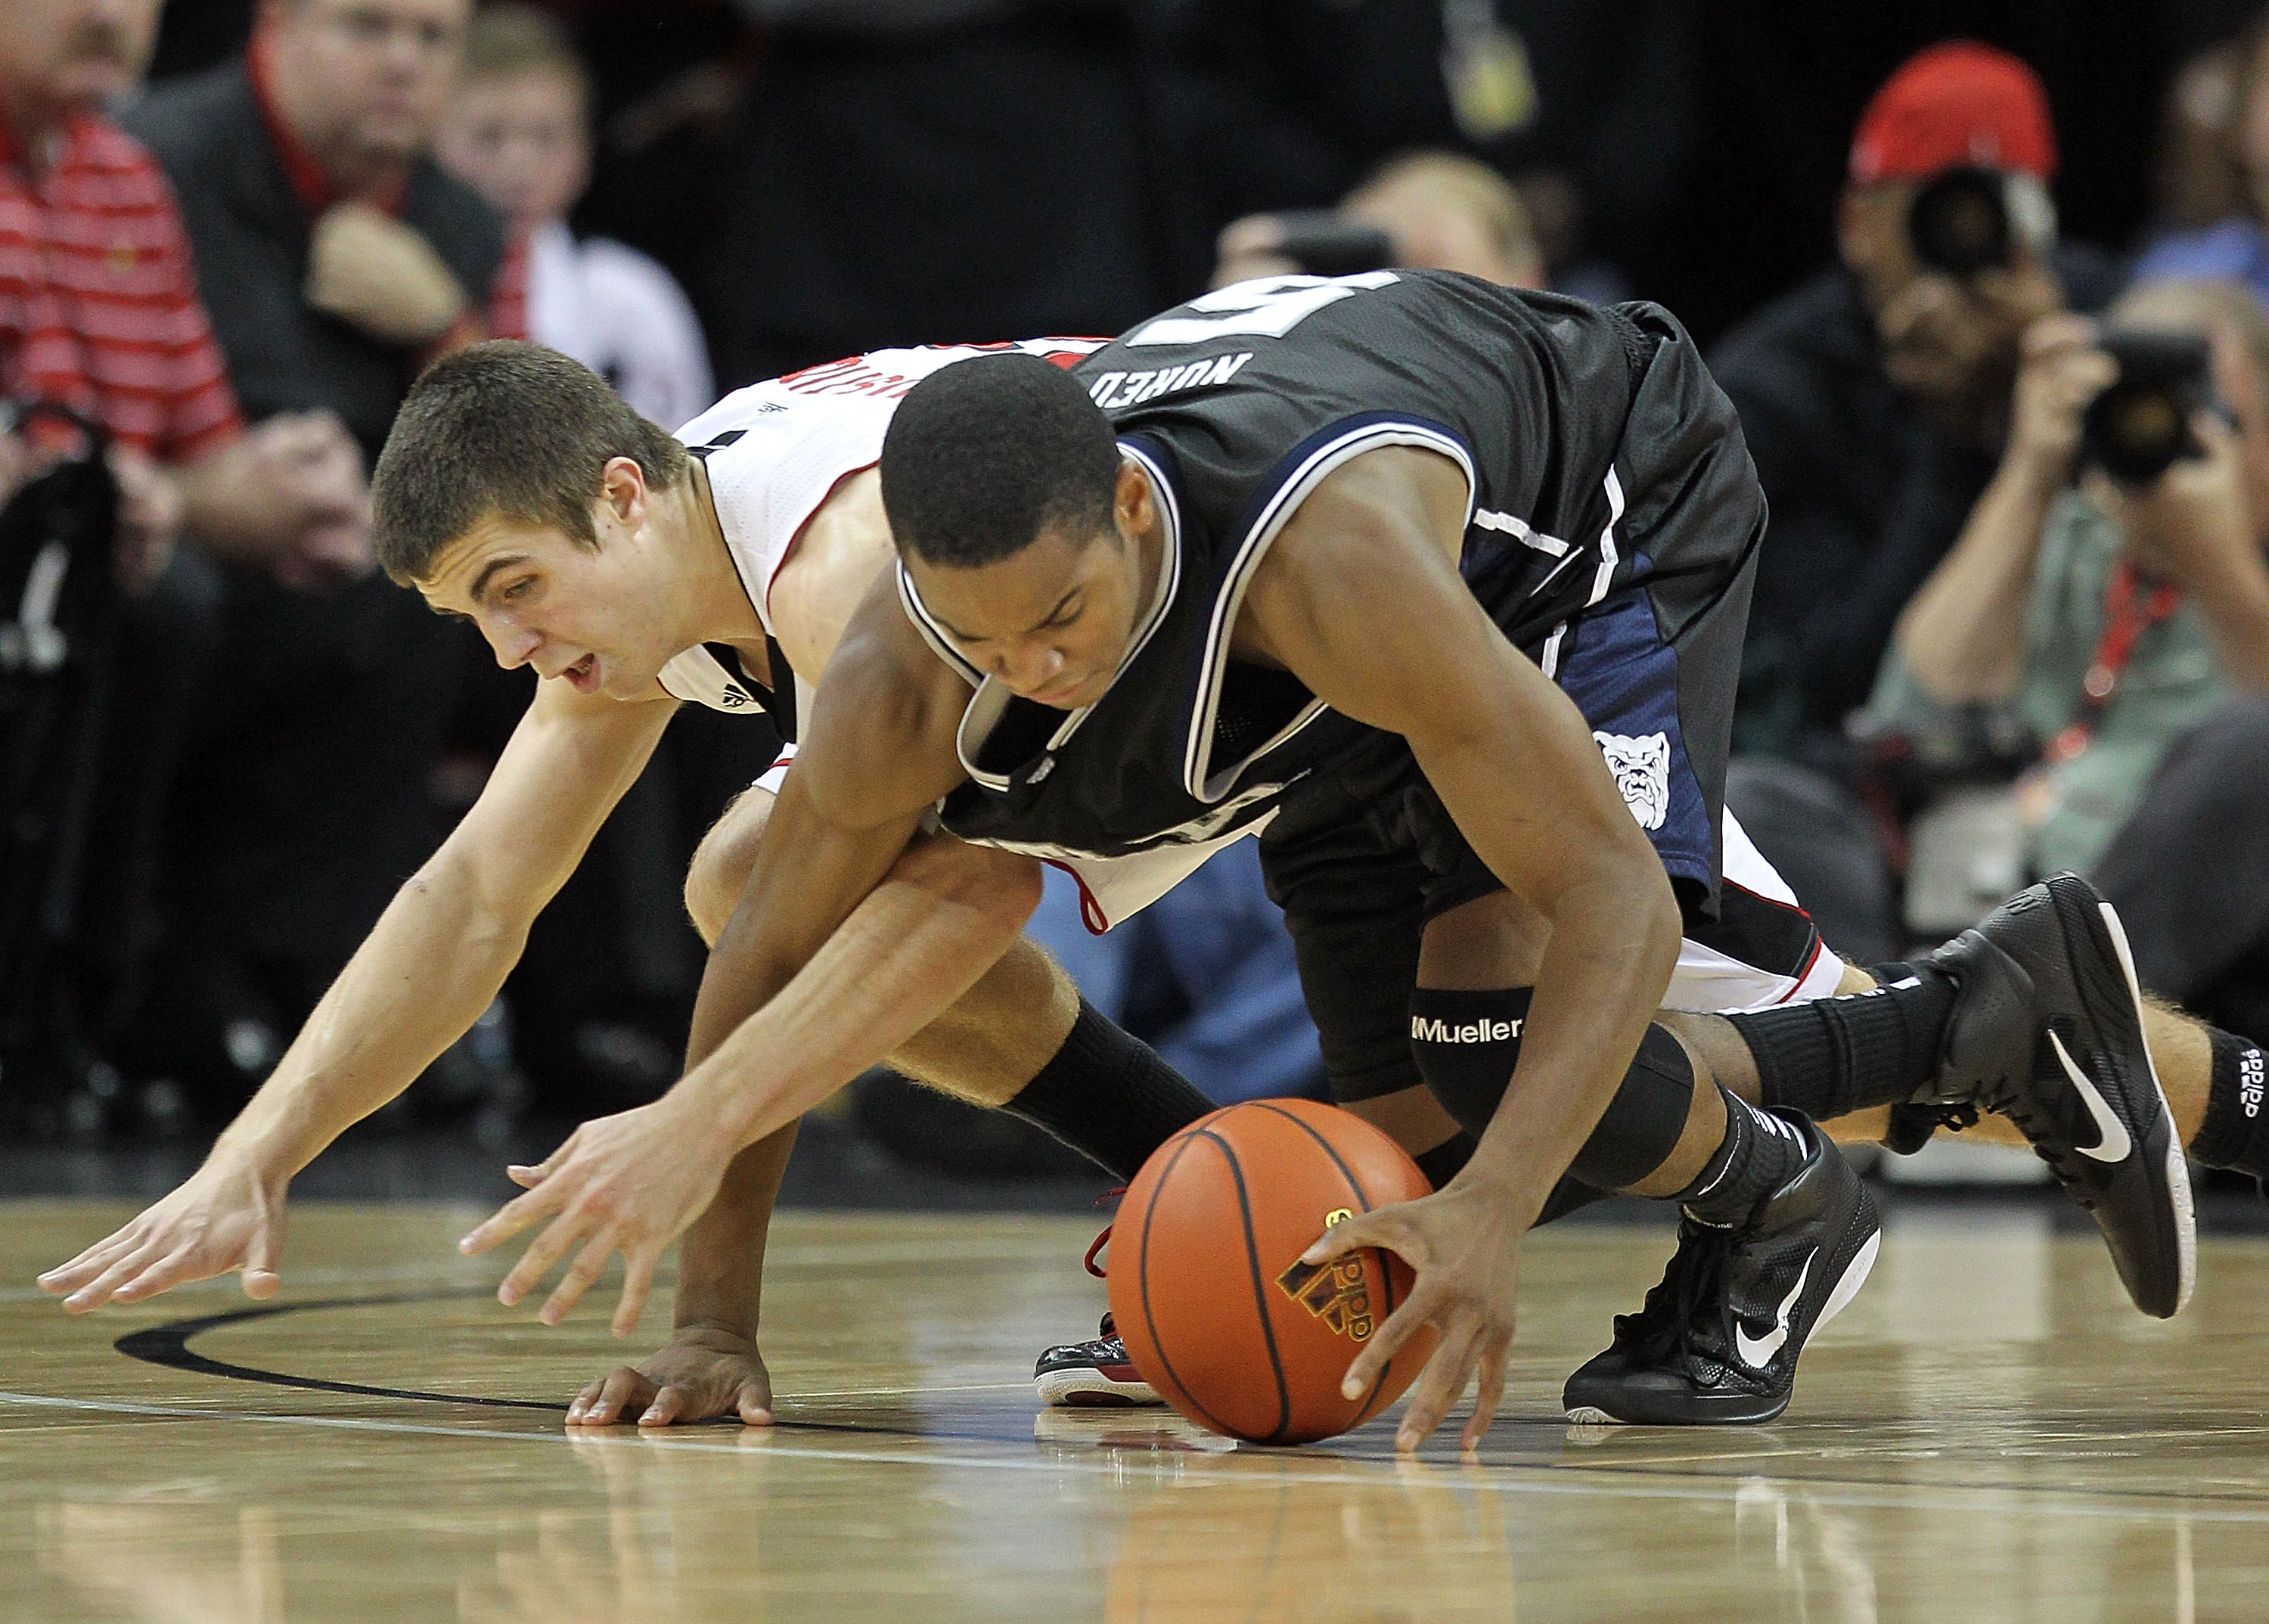 LOUISVILLE, KY - NOVEMBER 16:  Ronald Nored #5  of the Butler Bulldogs and Elisha Justice #22 of the Louisville Cardinals battle for a loose ball during the game at the KFC Yum! Center on November 16, 2010 in Louisville, Kentucky.  (Photo by Andy Lyons/Ge